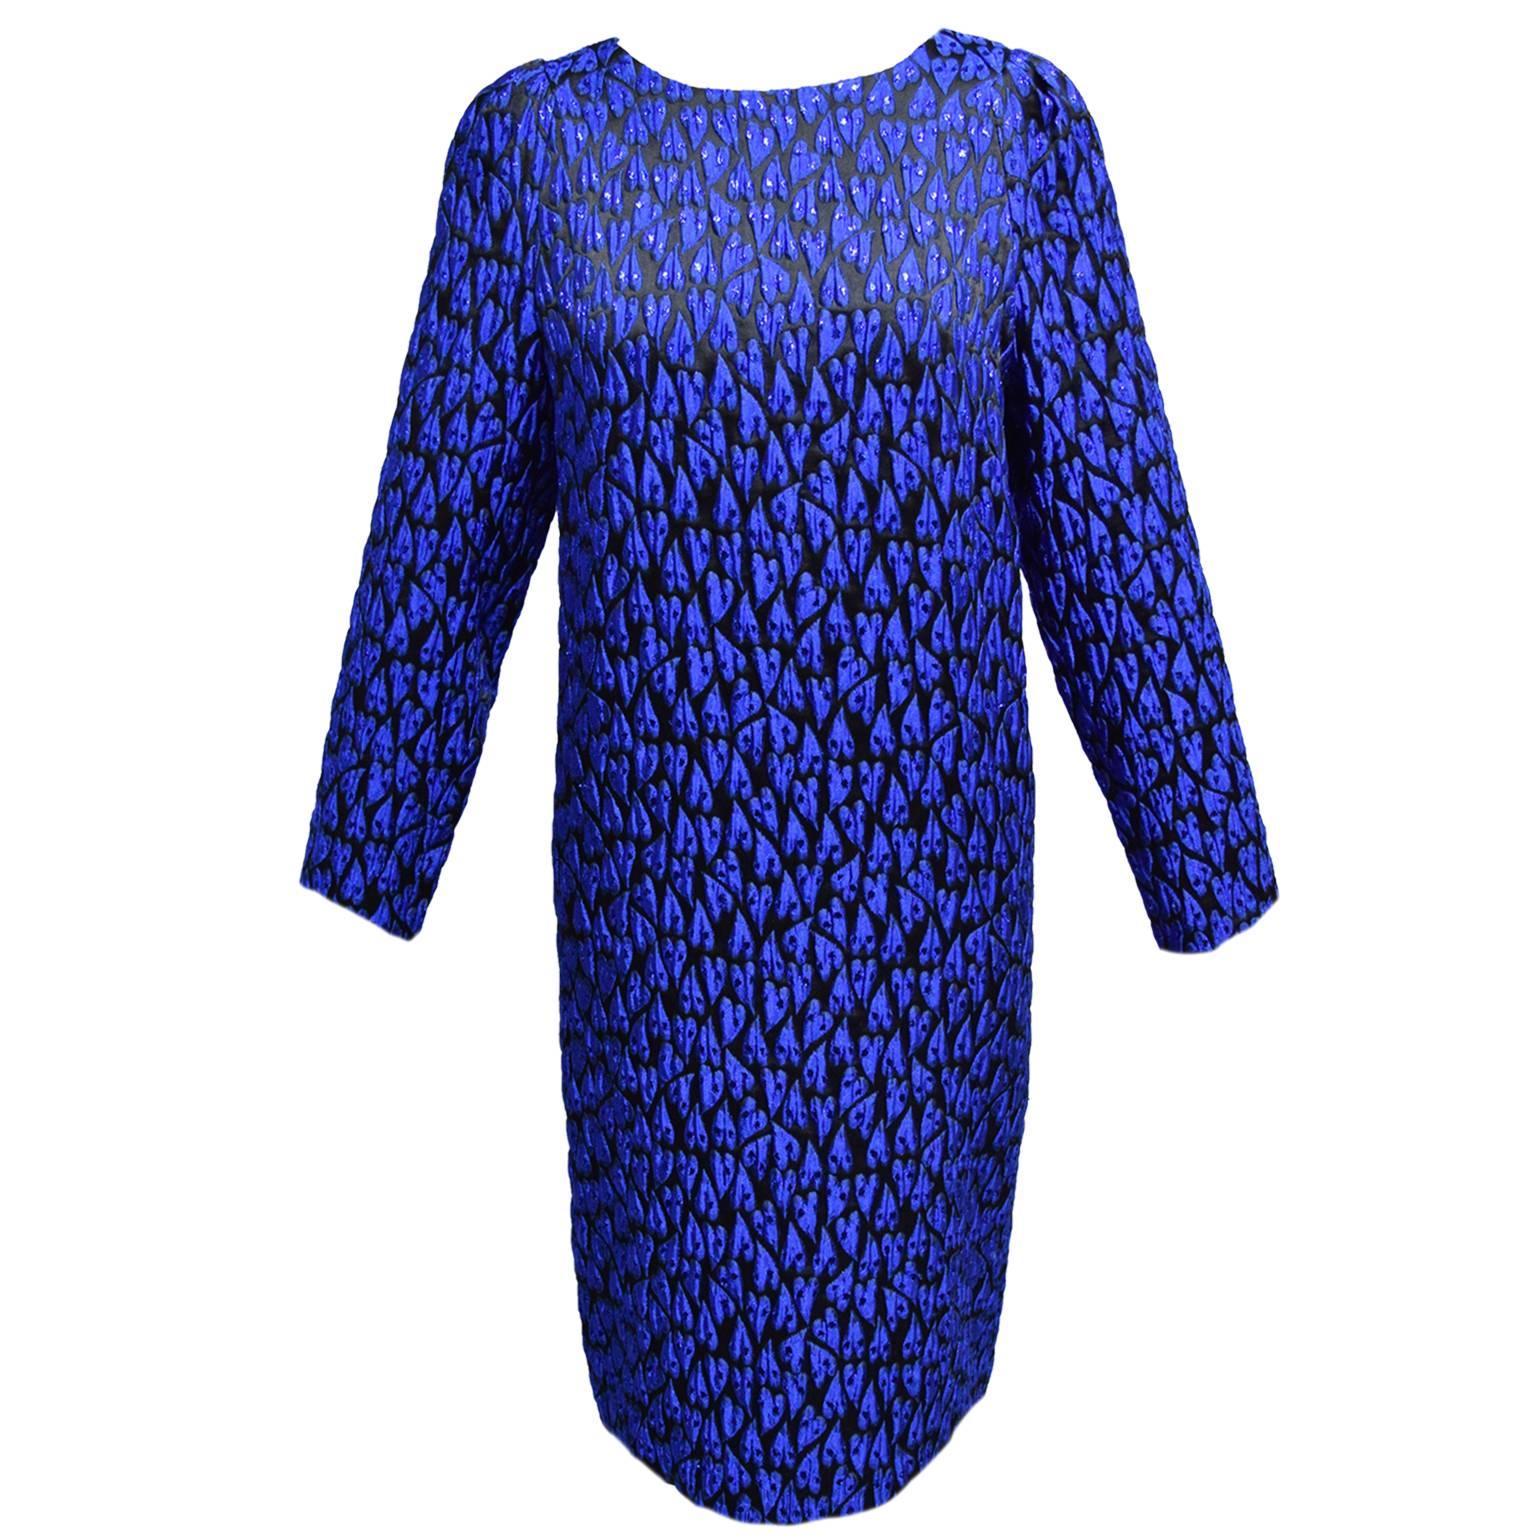 Mauro Grifoni Iridescent Royal Blue and Black Jacquard Heart Printed Shift Dress For Sale